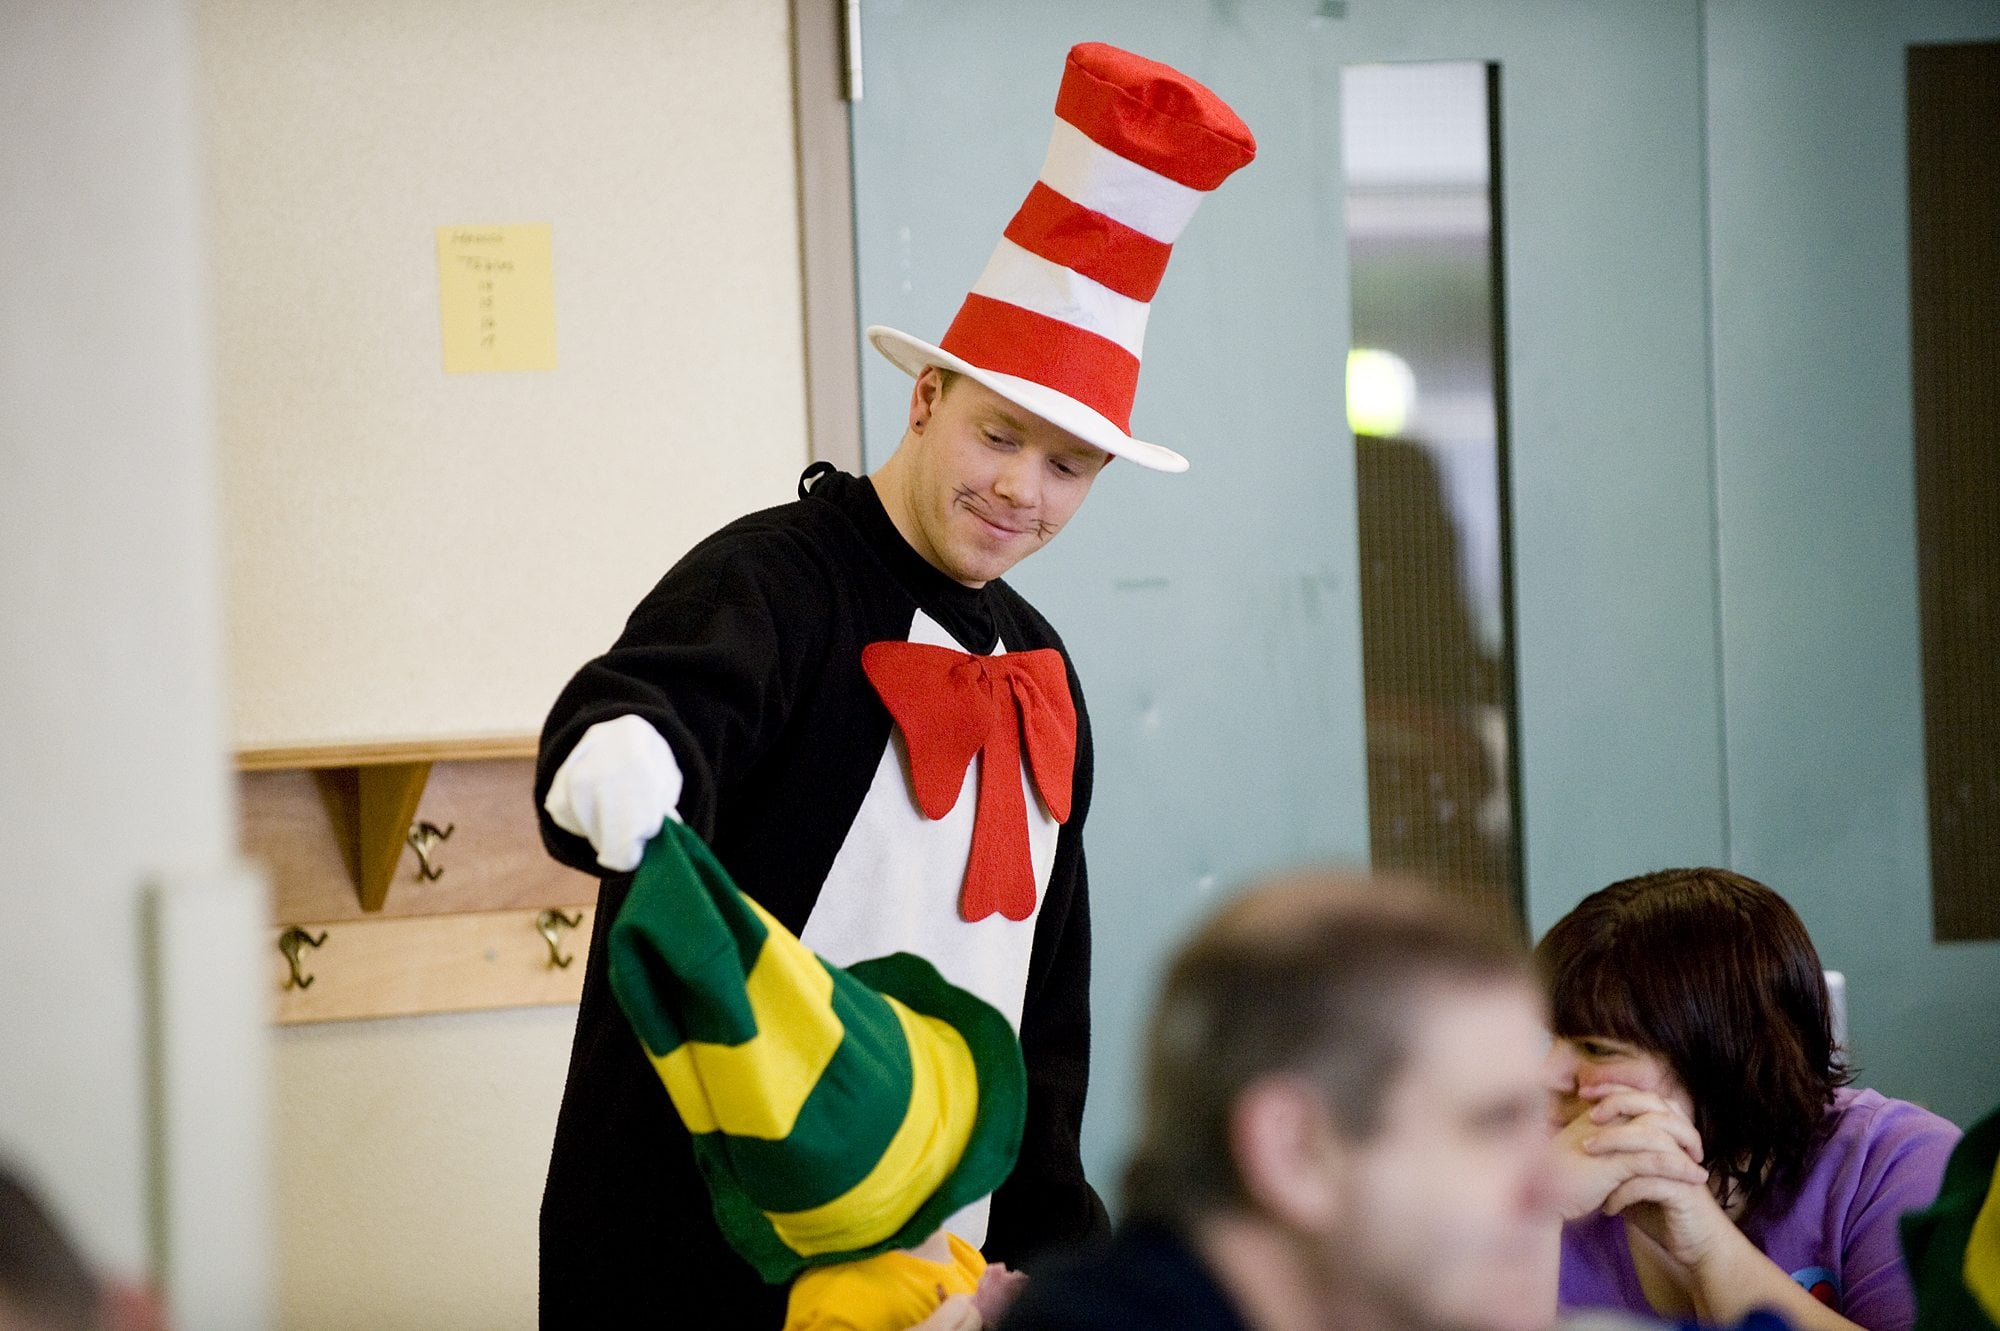 Ryan Colgrove plays the Cat in the Hat at Hough Elementary's annual green eggs and ham breakfast.